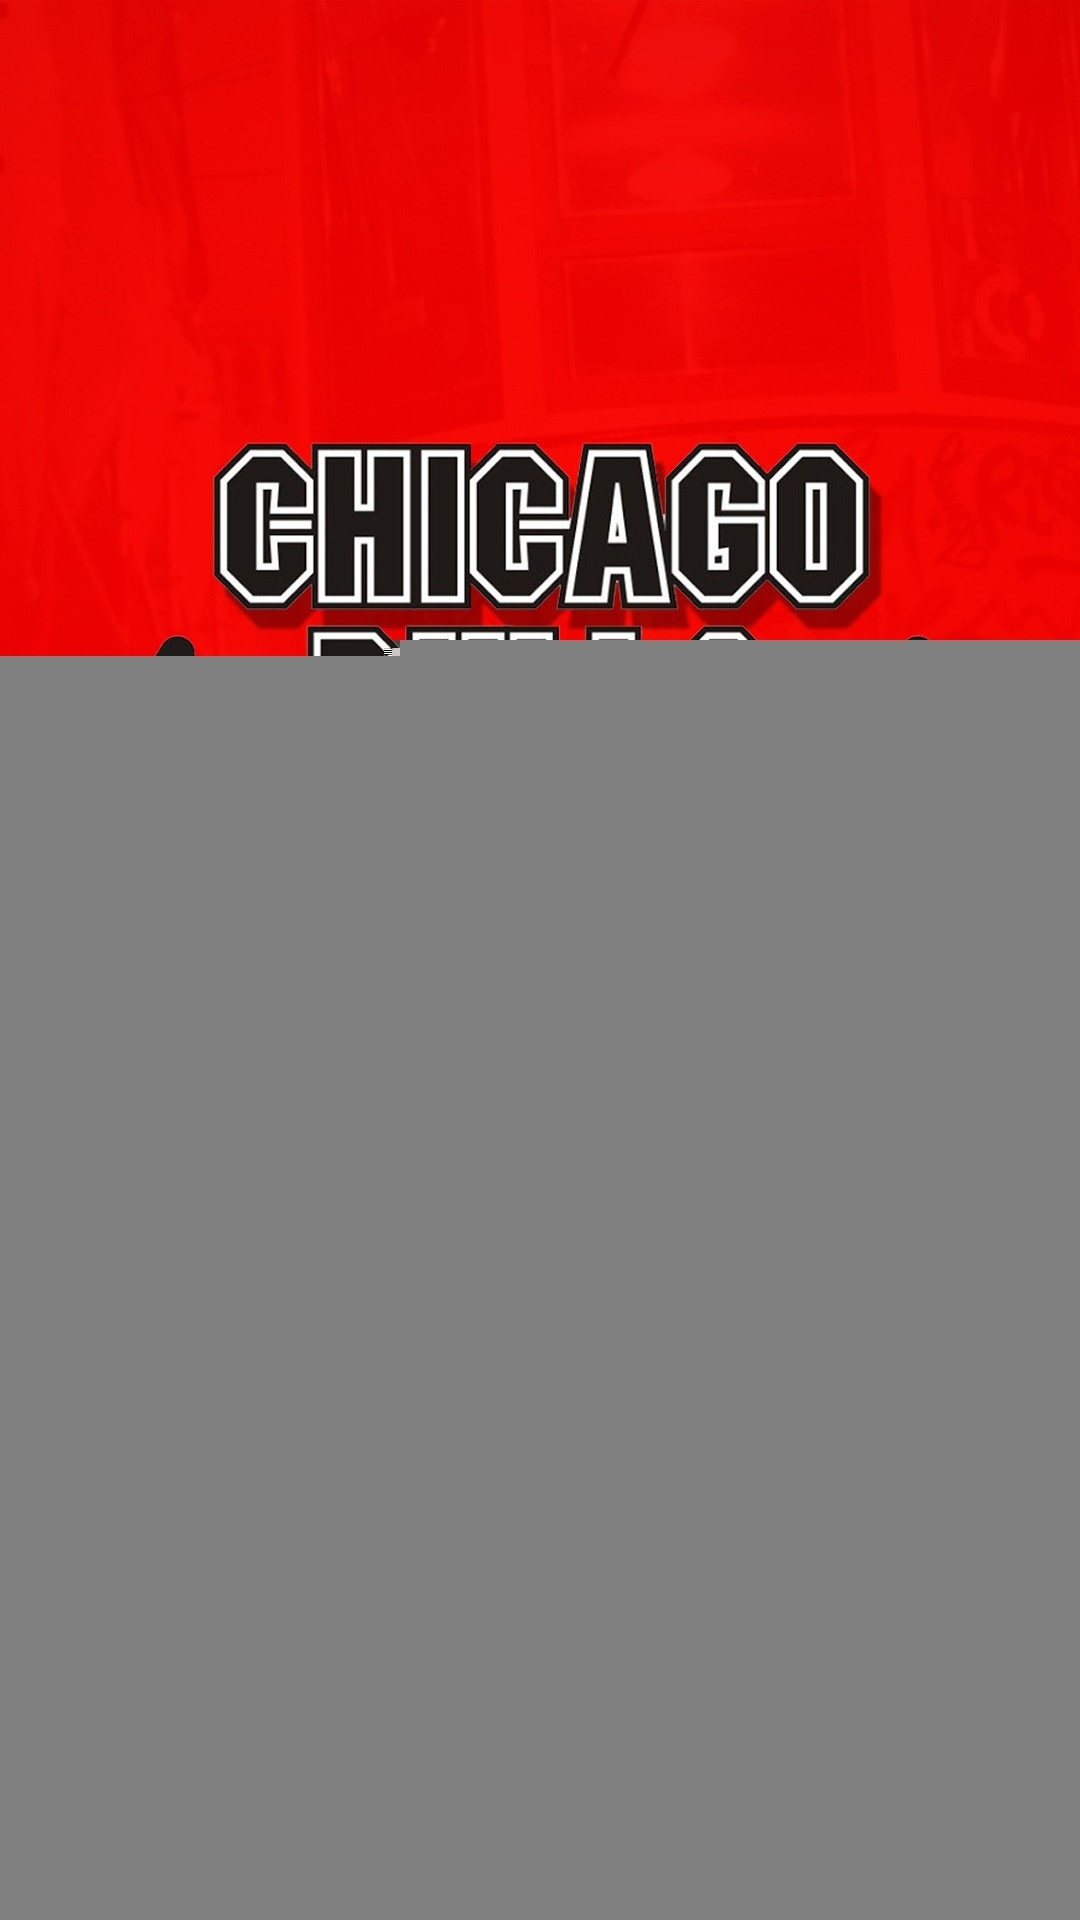 the chicago bulls wallpapers | hd wallpapers | id #17704